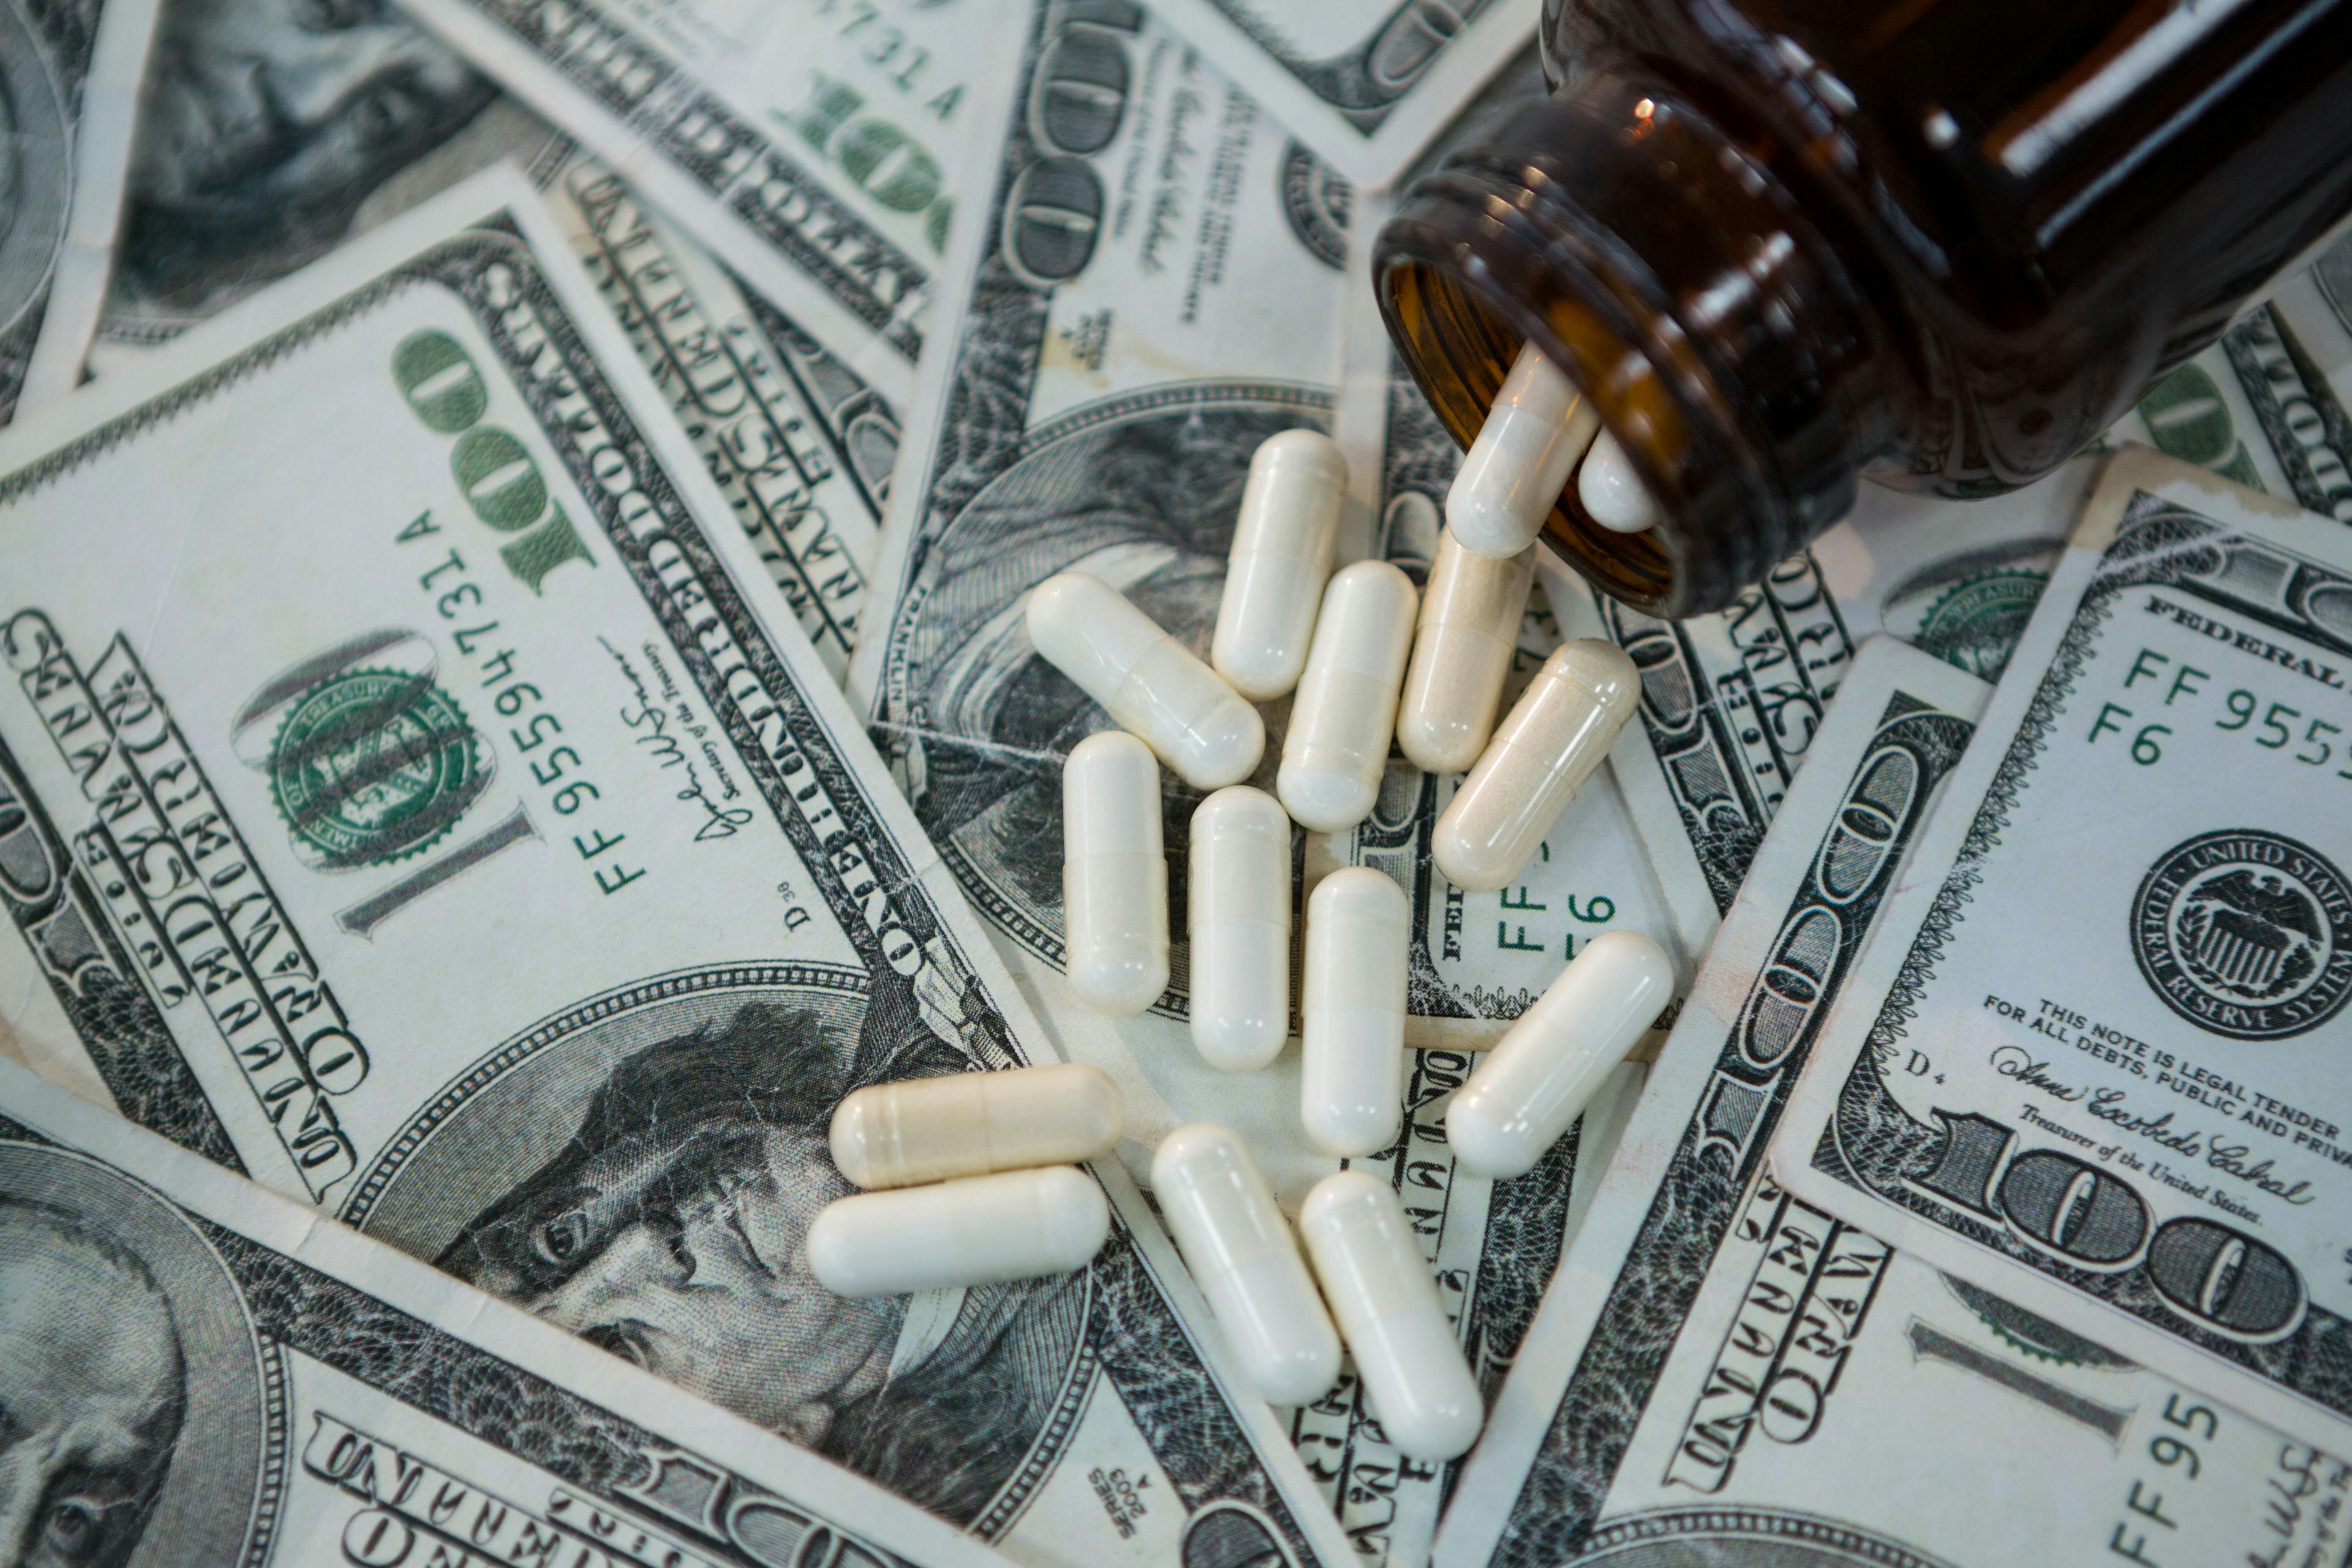 Study: Biosimilar Drugs Could Generate $38.4 Billion in Savings Over 5 Years